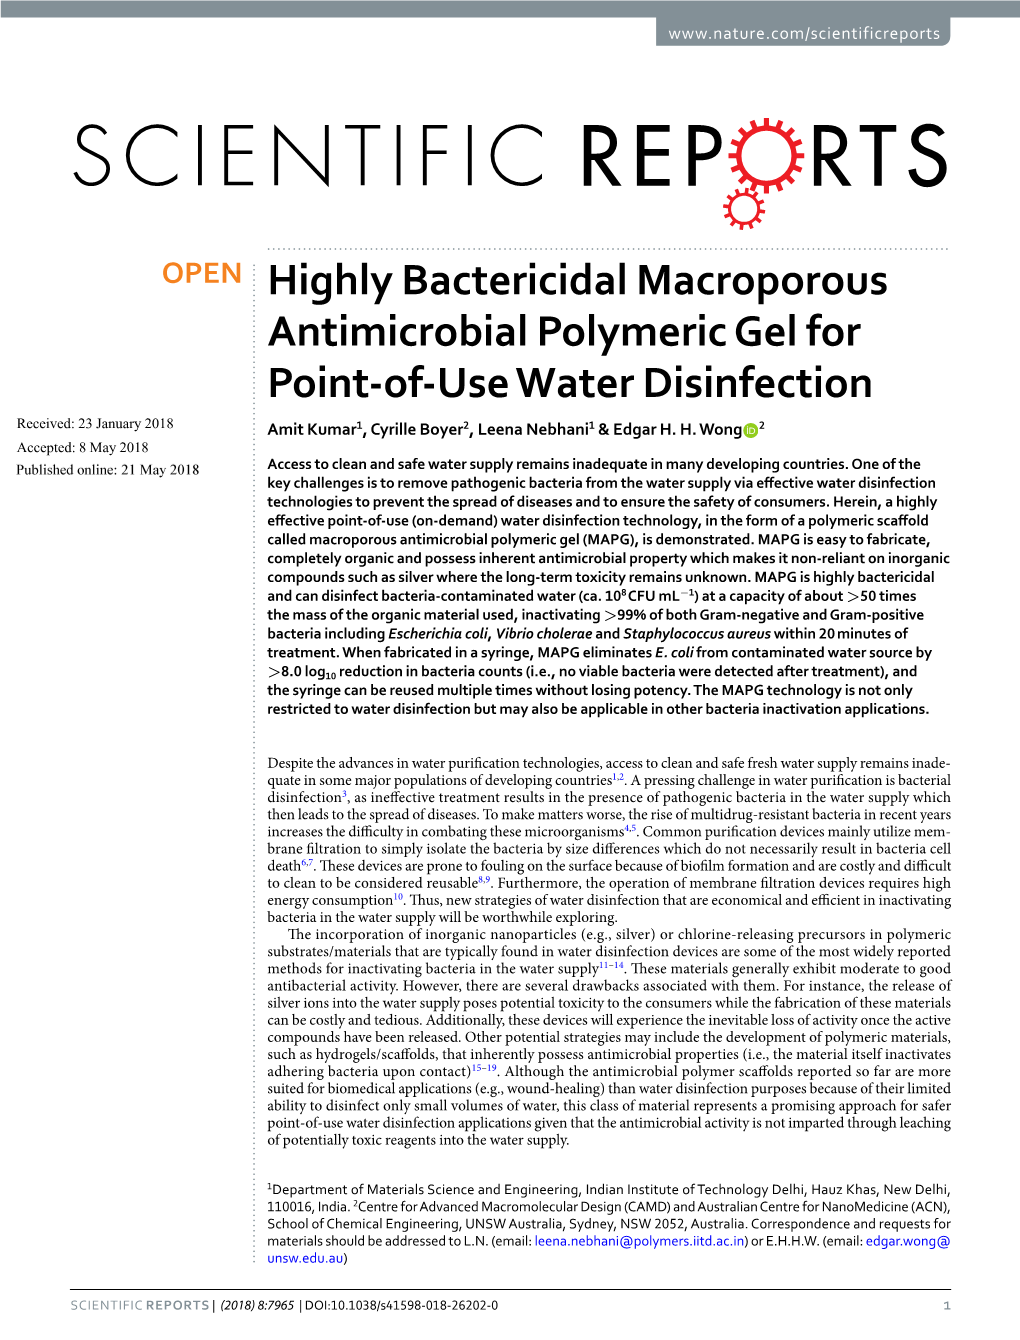 Highly Bactericidal Macroporous Antimicrobial Polymeric Gel for Point-Of-Use Water Disinfection